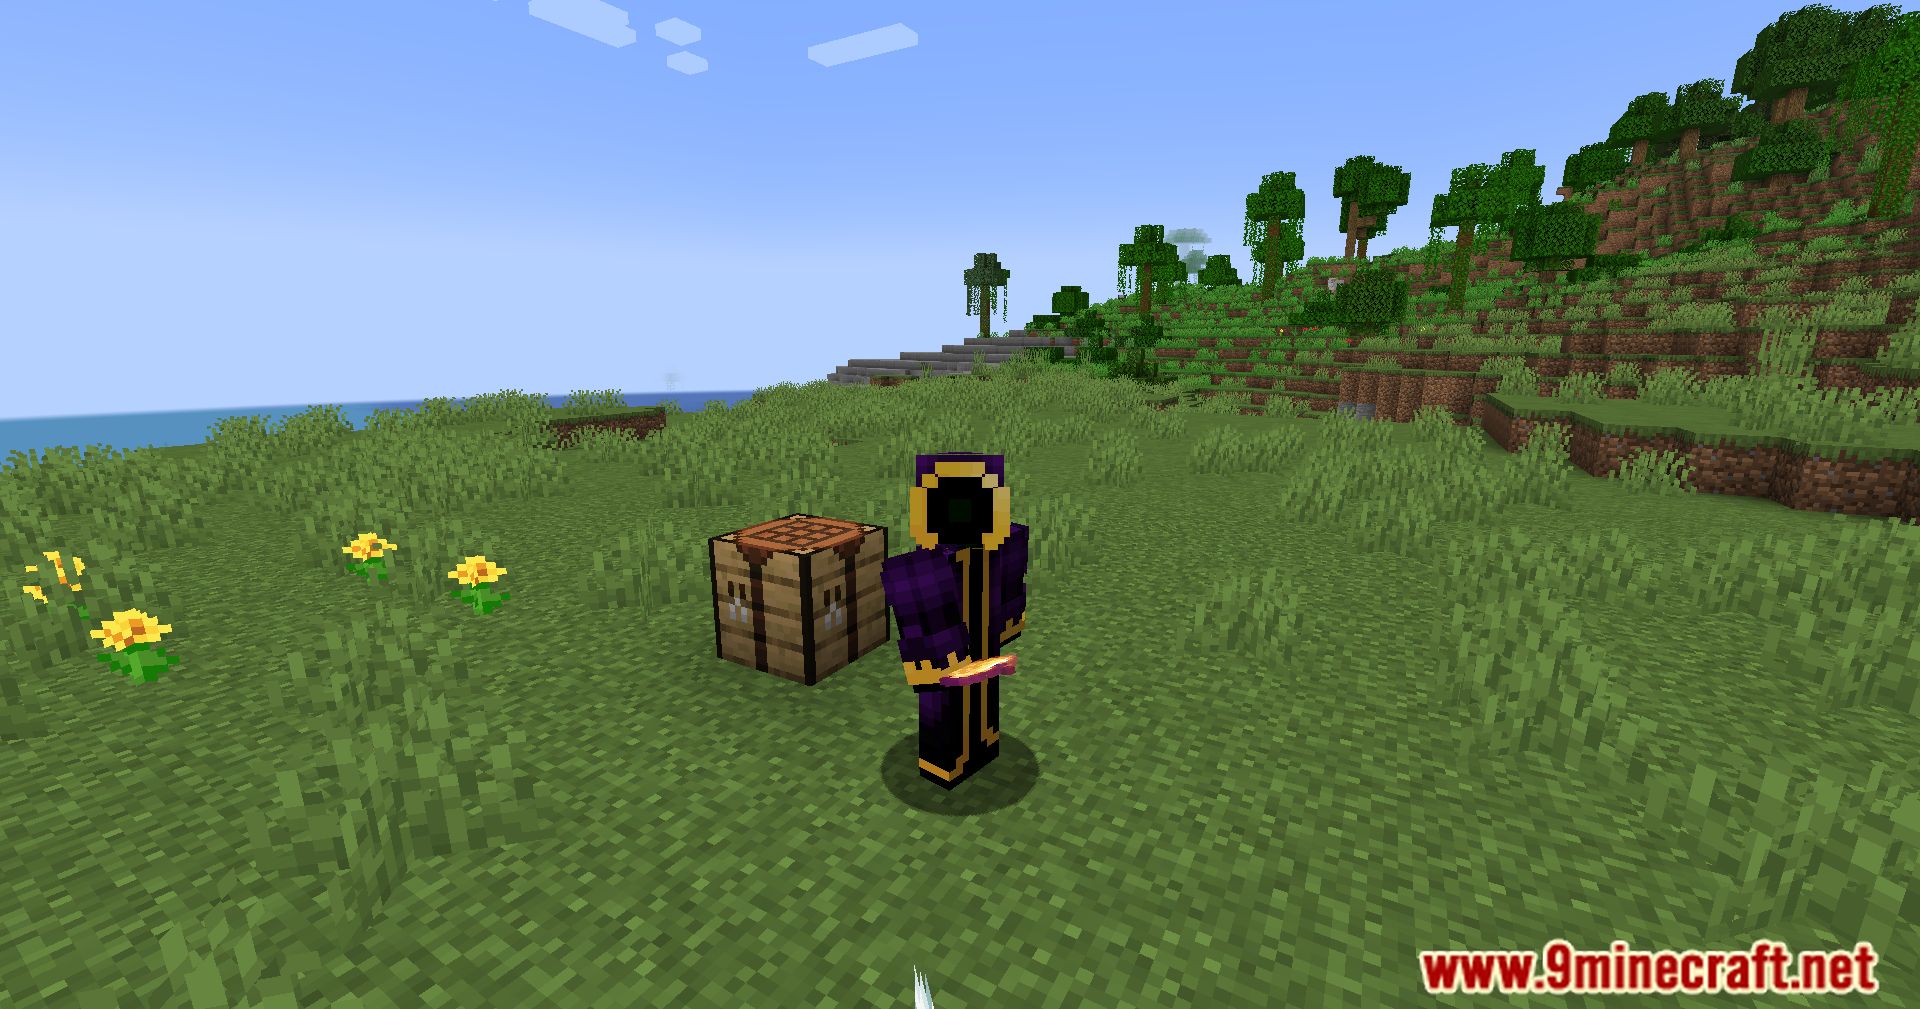 Craftable Enchanted Golden Apple Mod (1.20.4, 1.19.4) - Return To Classic Crafting, Reintroducing Notch Apples 10